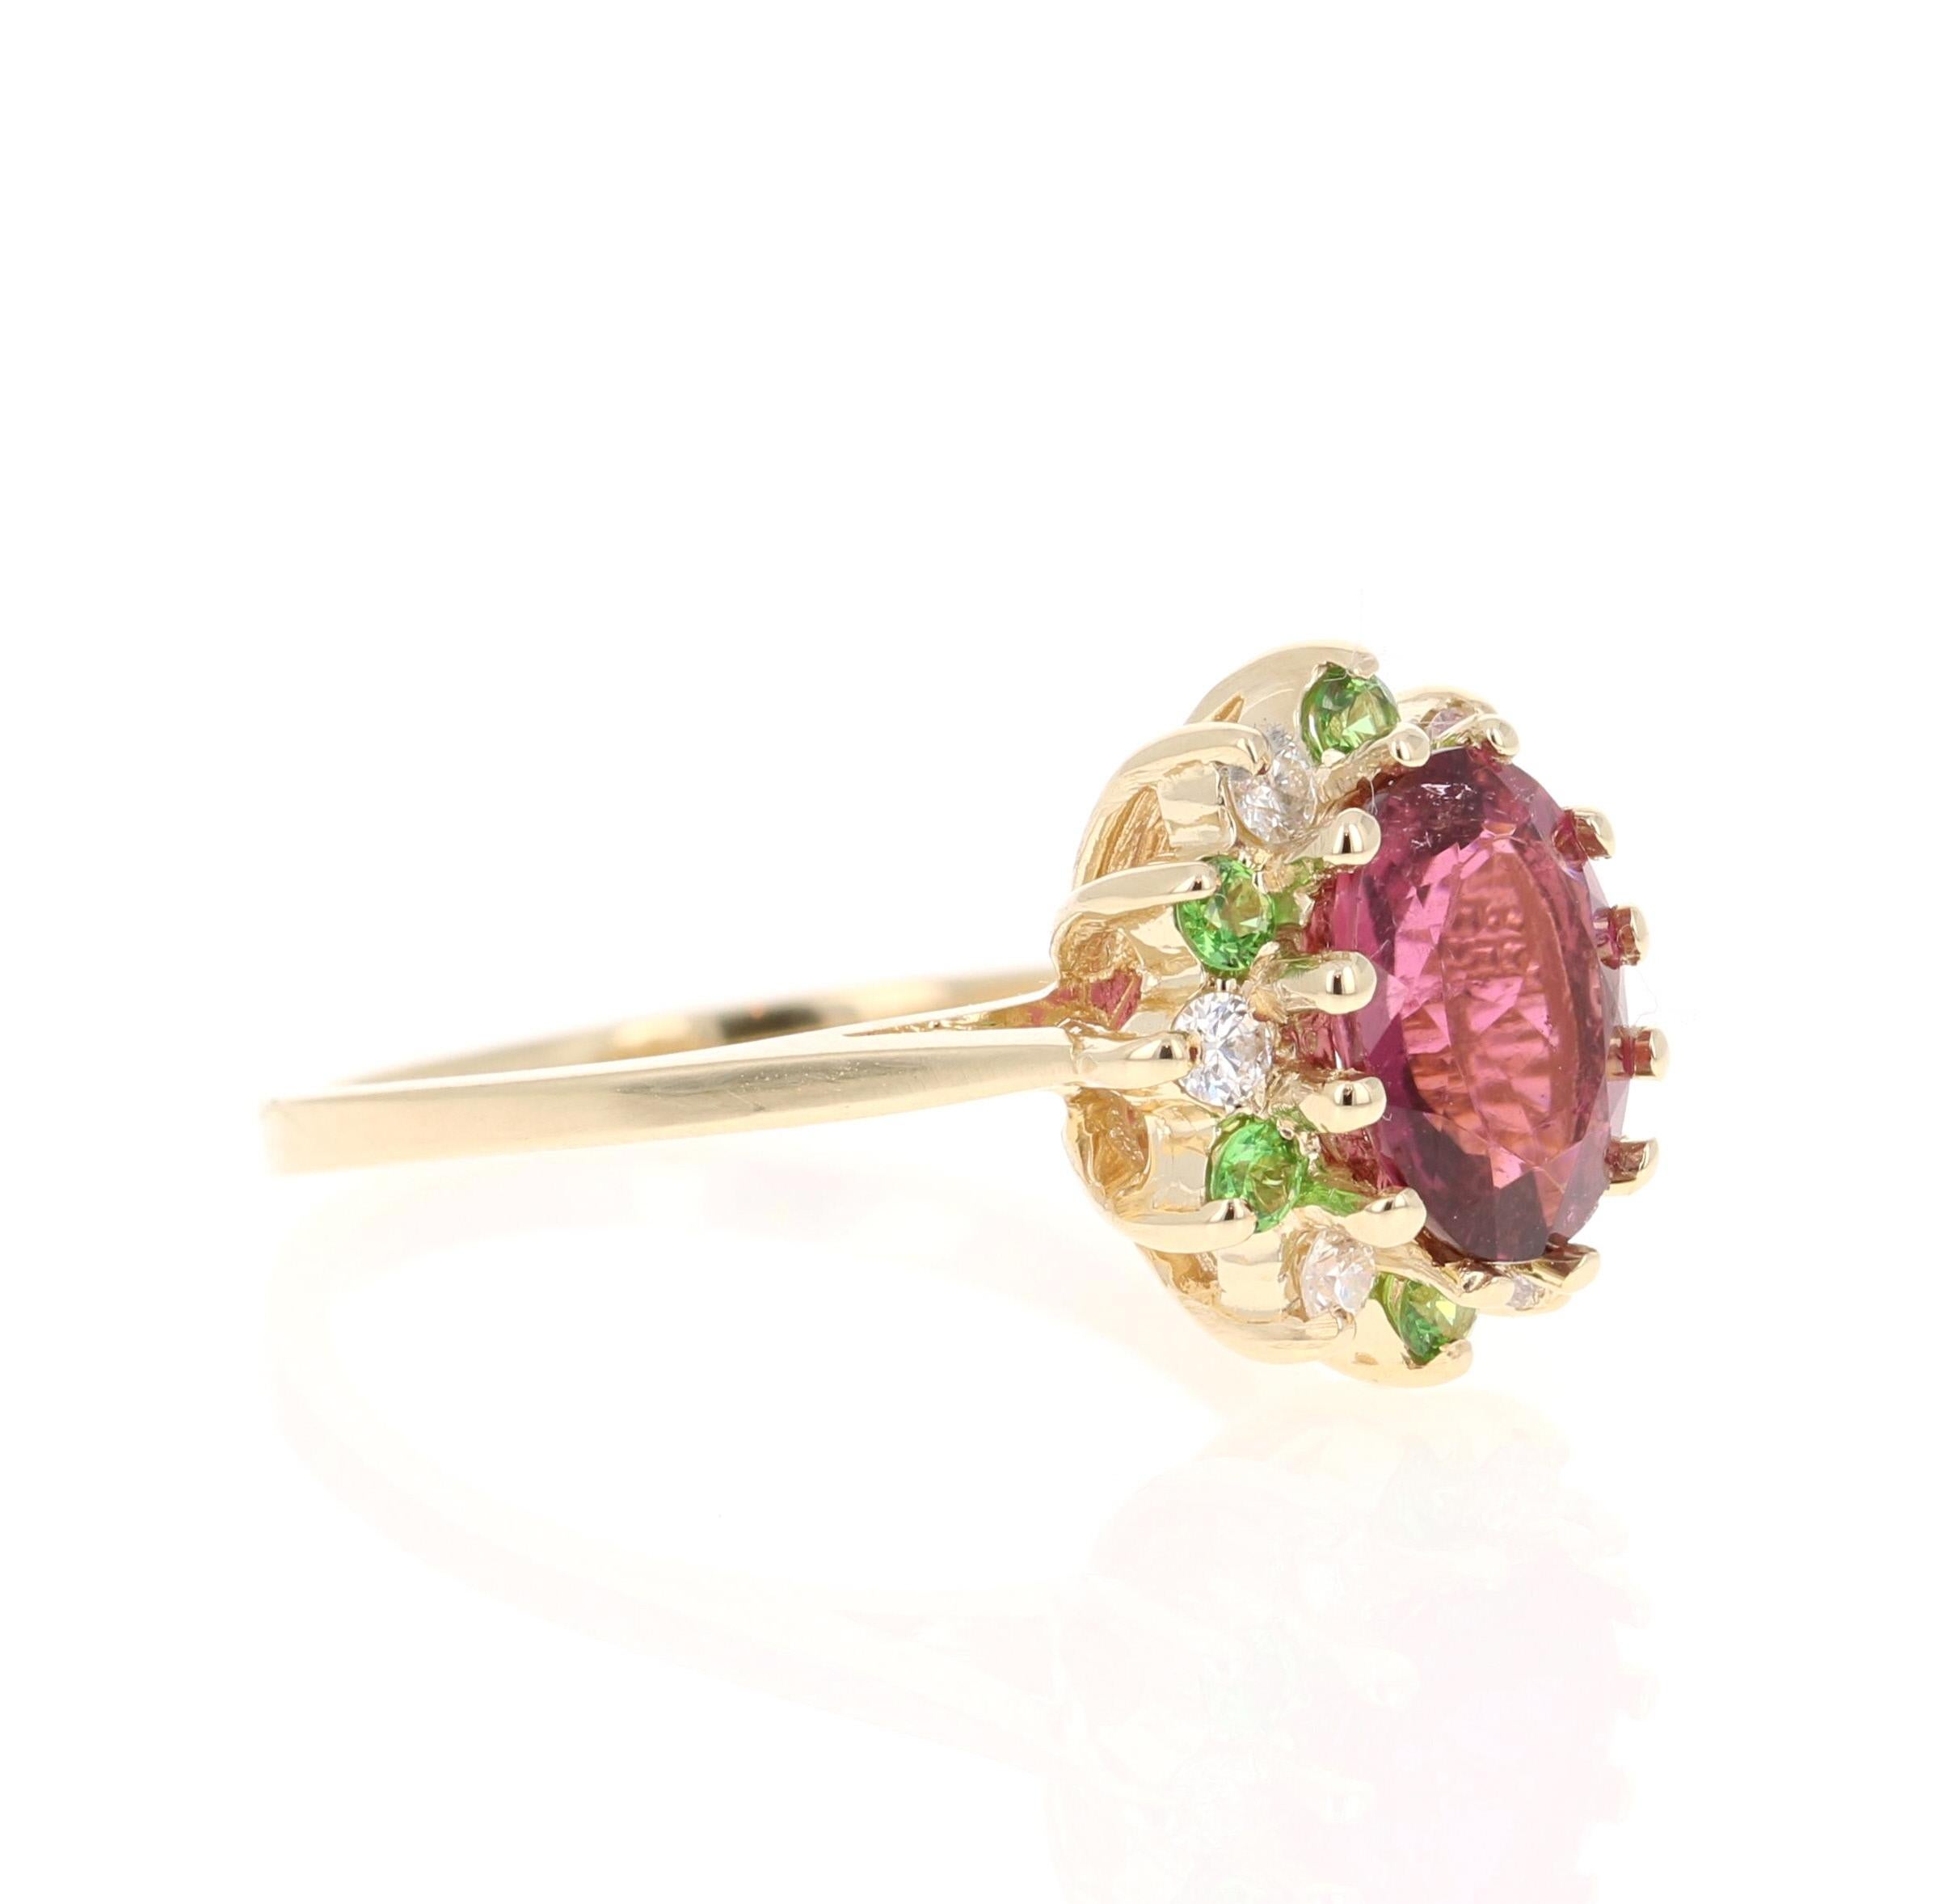 This ring has a gorgeous Oval Cut Pink Tourmaline that weighs 1.59 Carats. Floating around the tourmaline is a unique halo of Tsavorites that weigh 0.20 Carats and 6 Round Cut Diamonds that weigh 0.18 Carats. (Clarity: SI, Color: F) The total carat